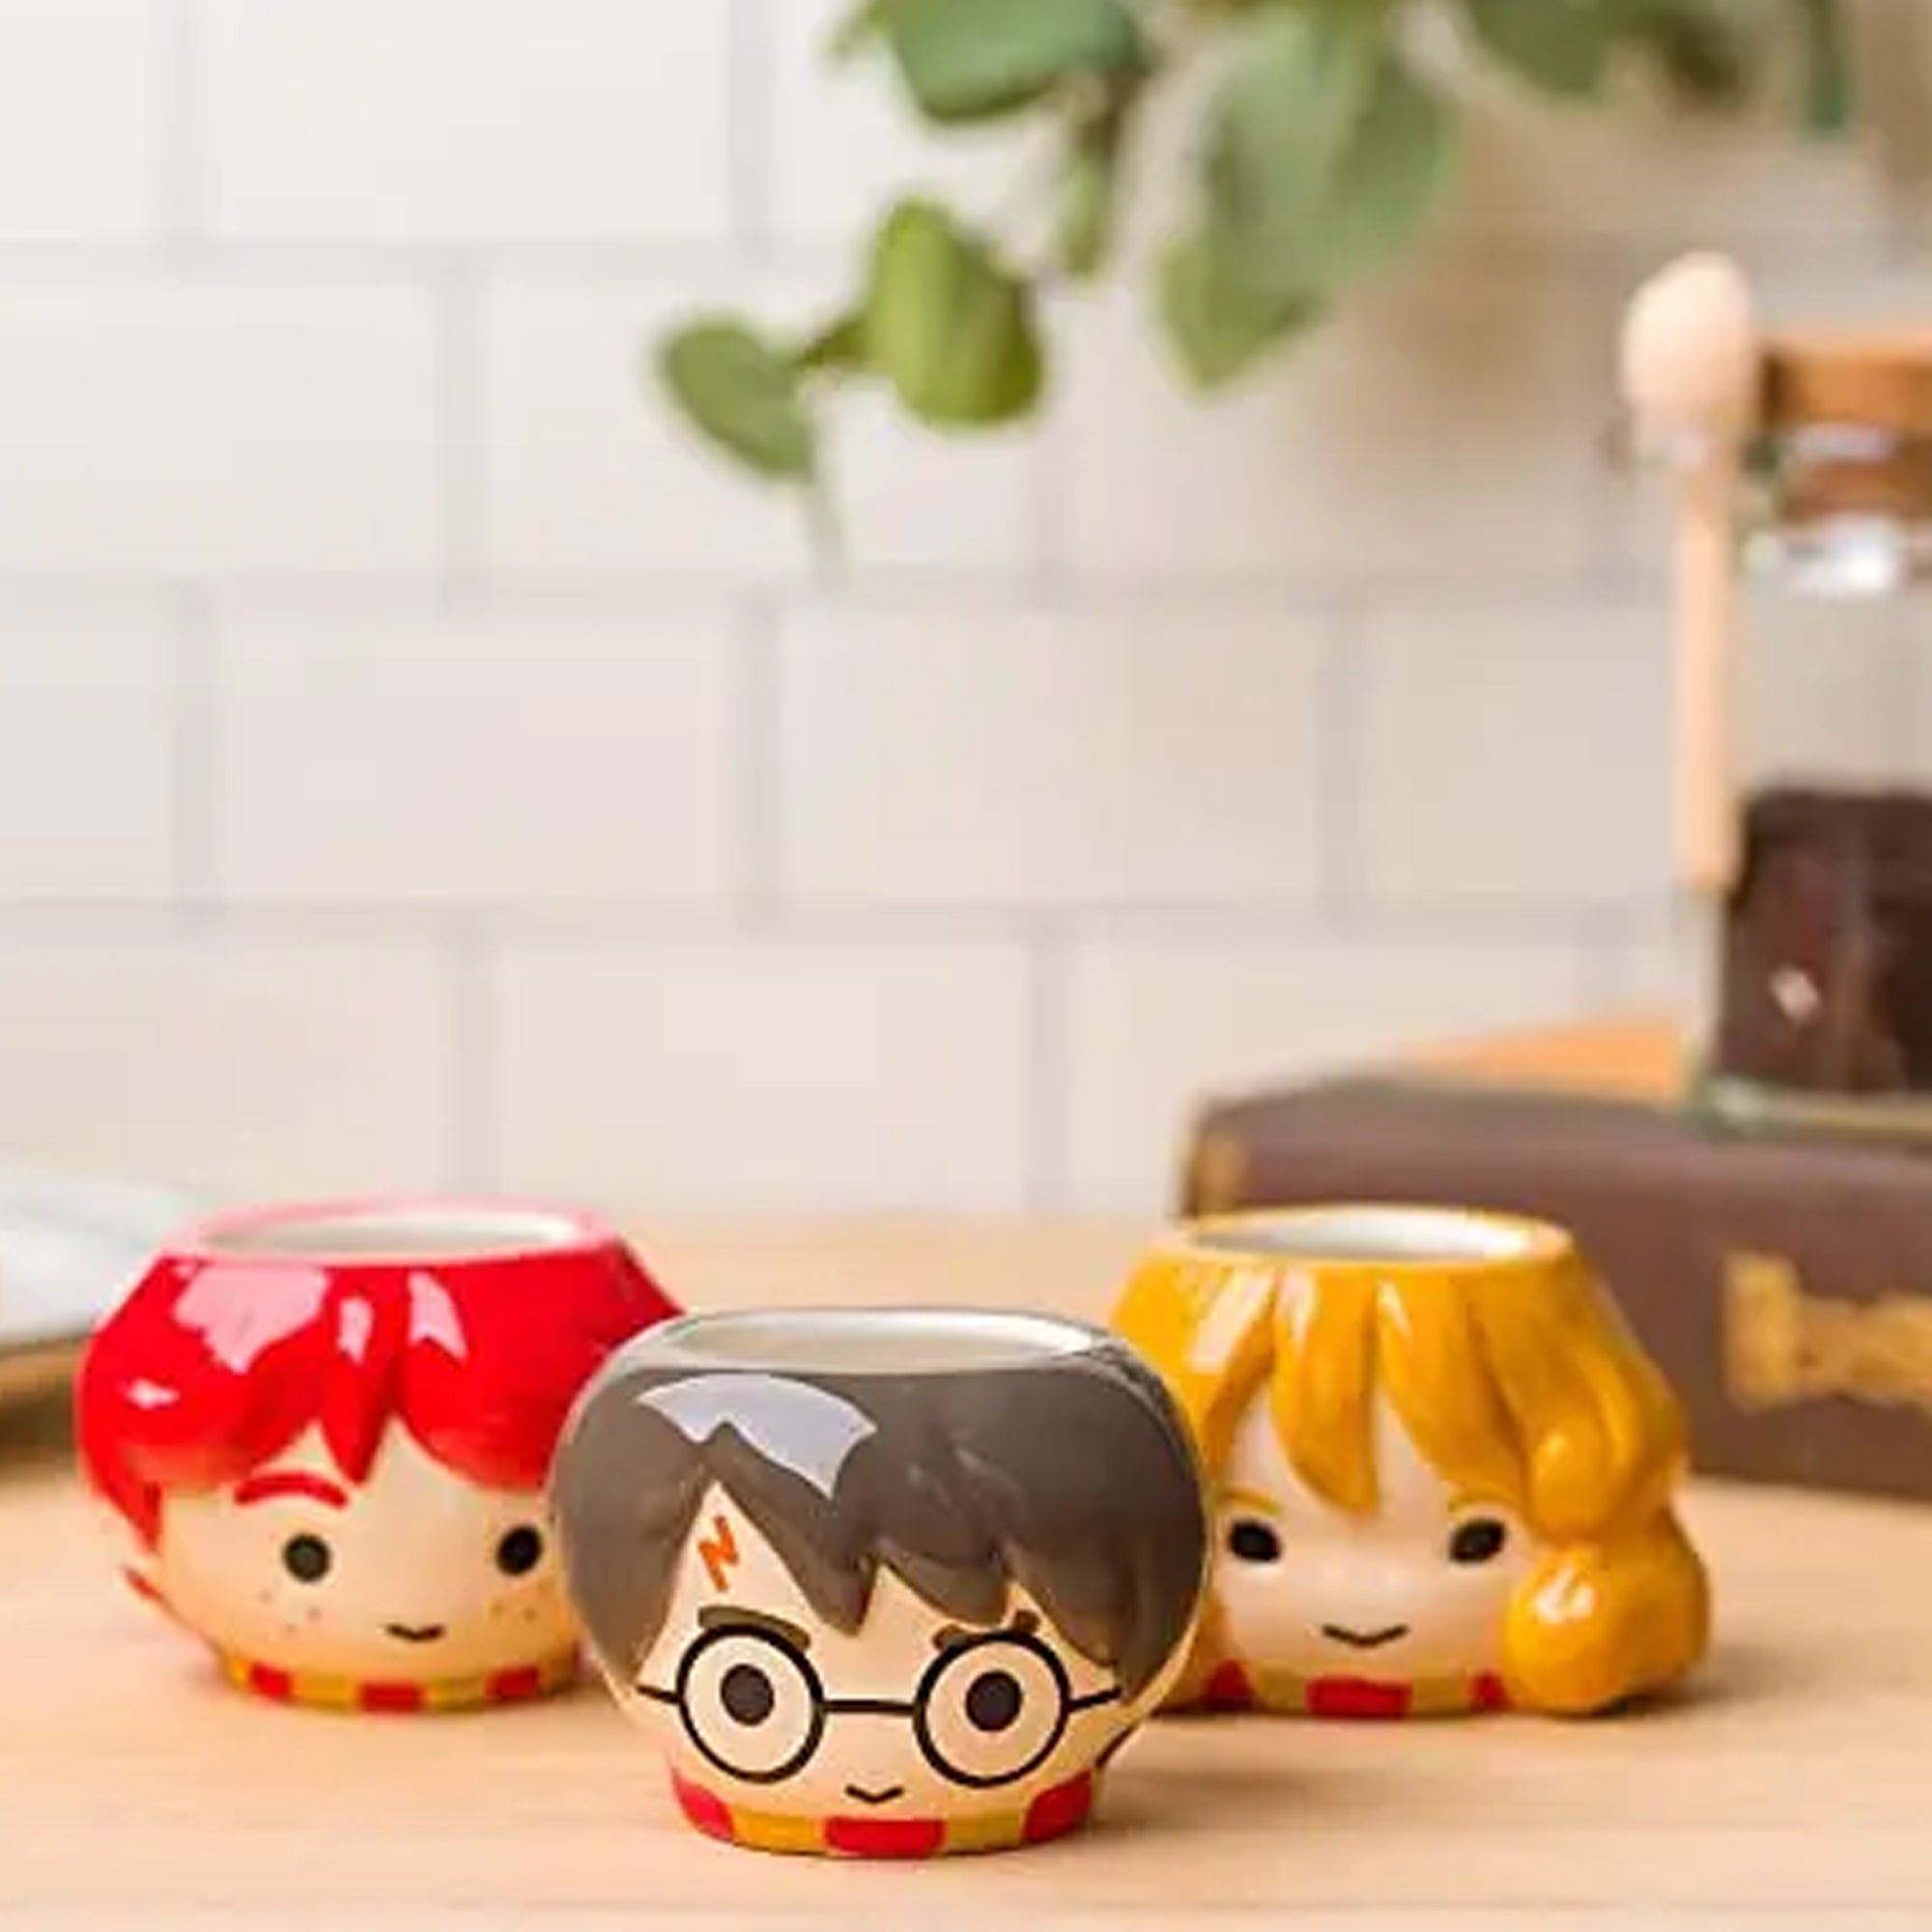 Harry Potter Hermione and Ron Mini Sculted Mug Set